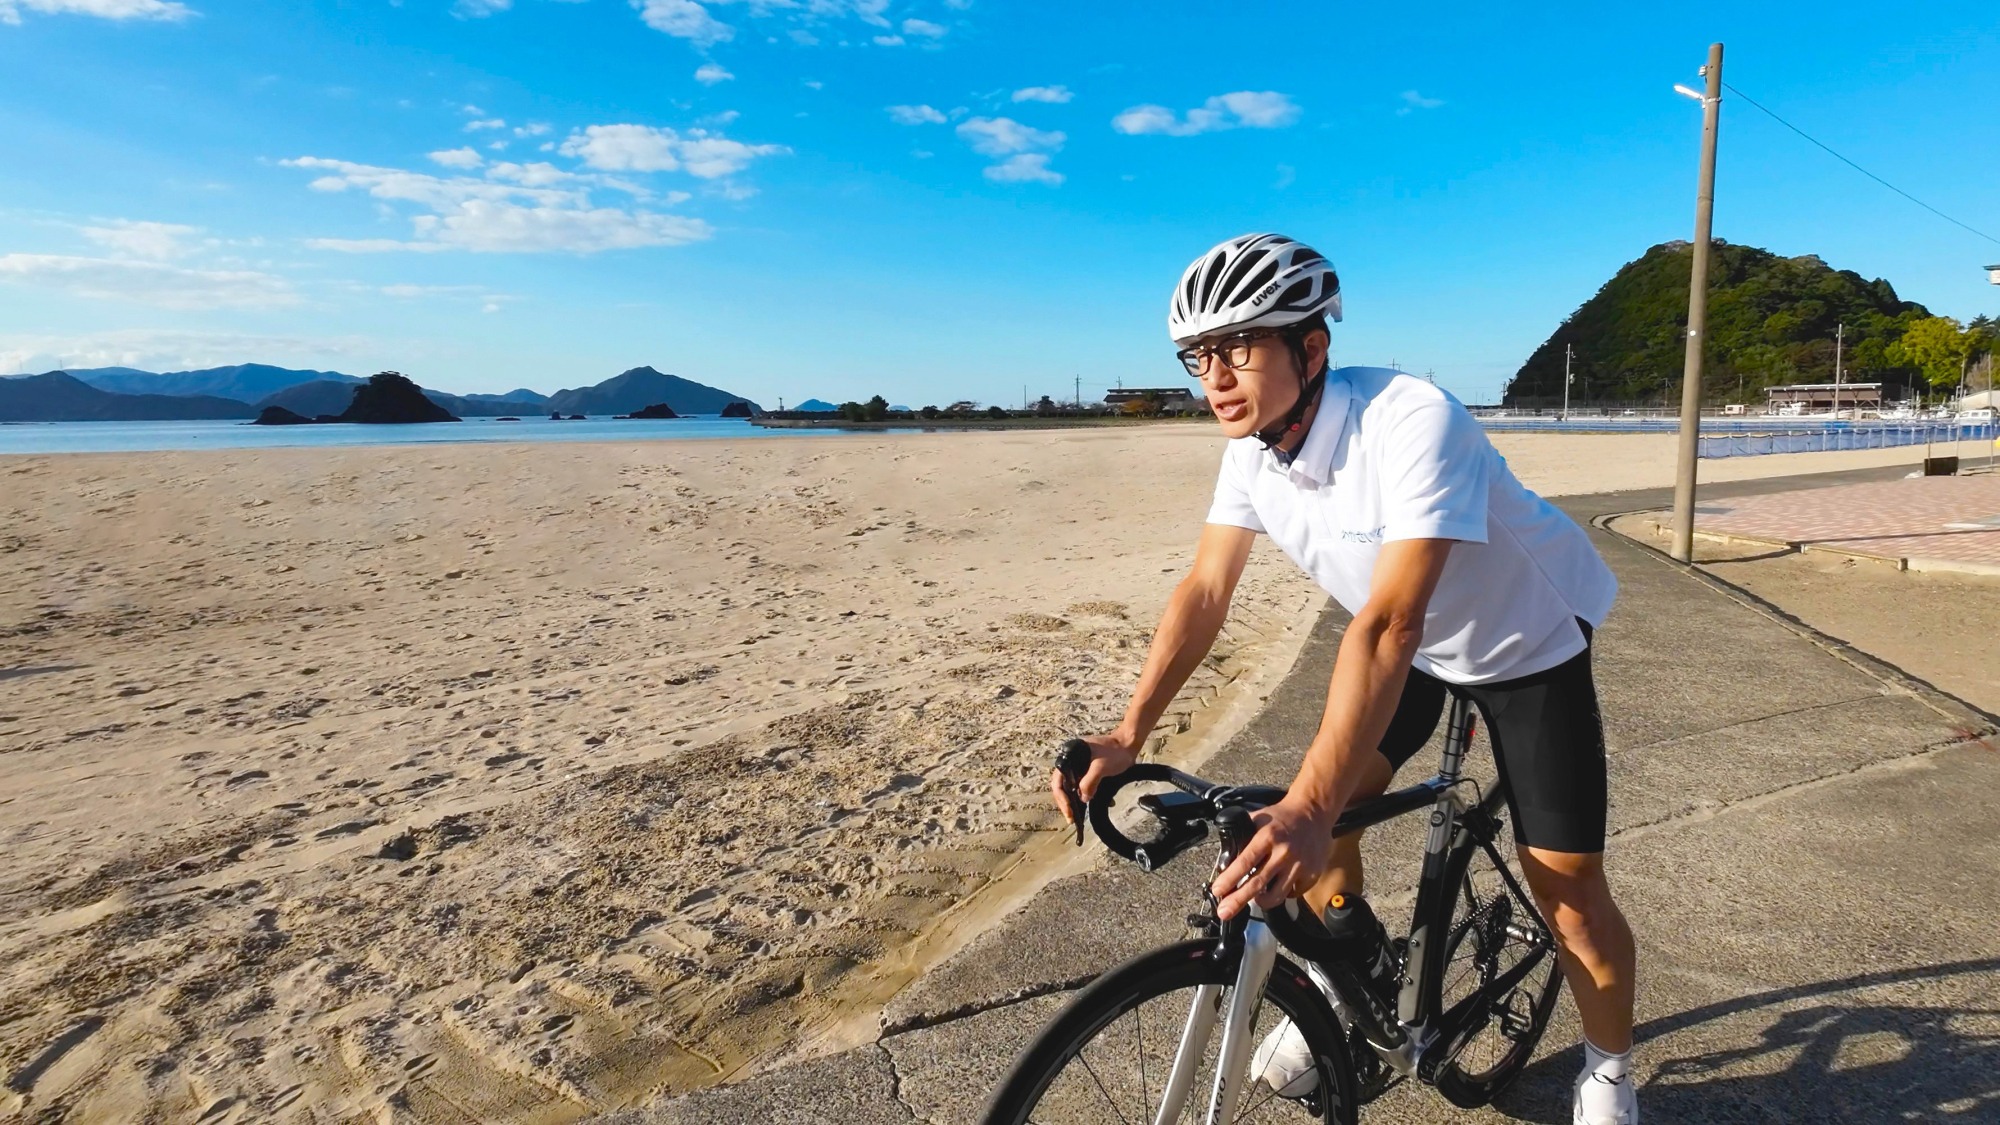 Former professional road bicycle racer Yasuharu Nakajima will guide you at your own pace along the 126 km of the Waka-Cycle course.